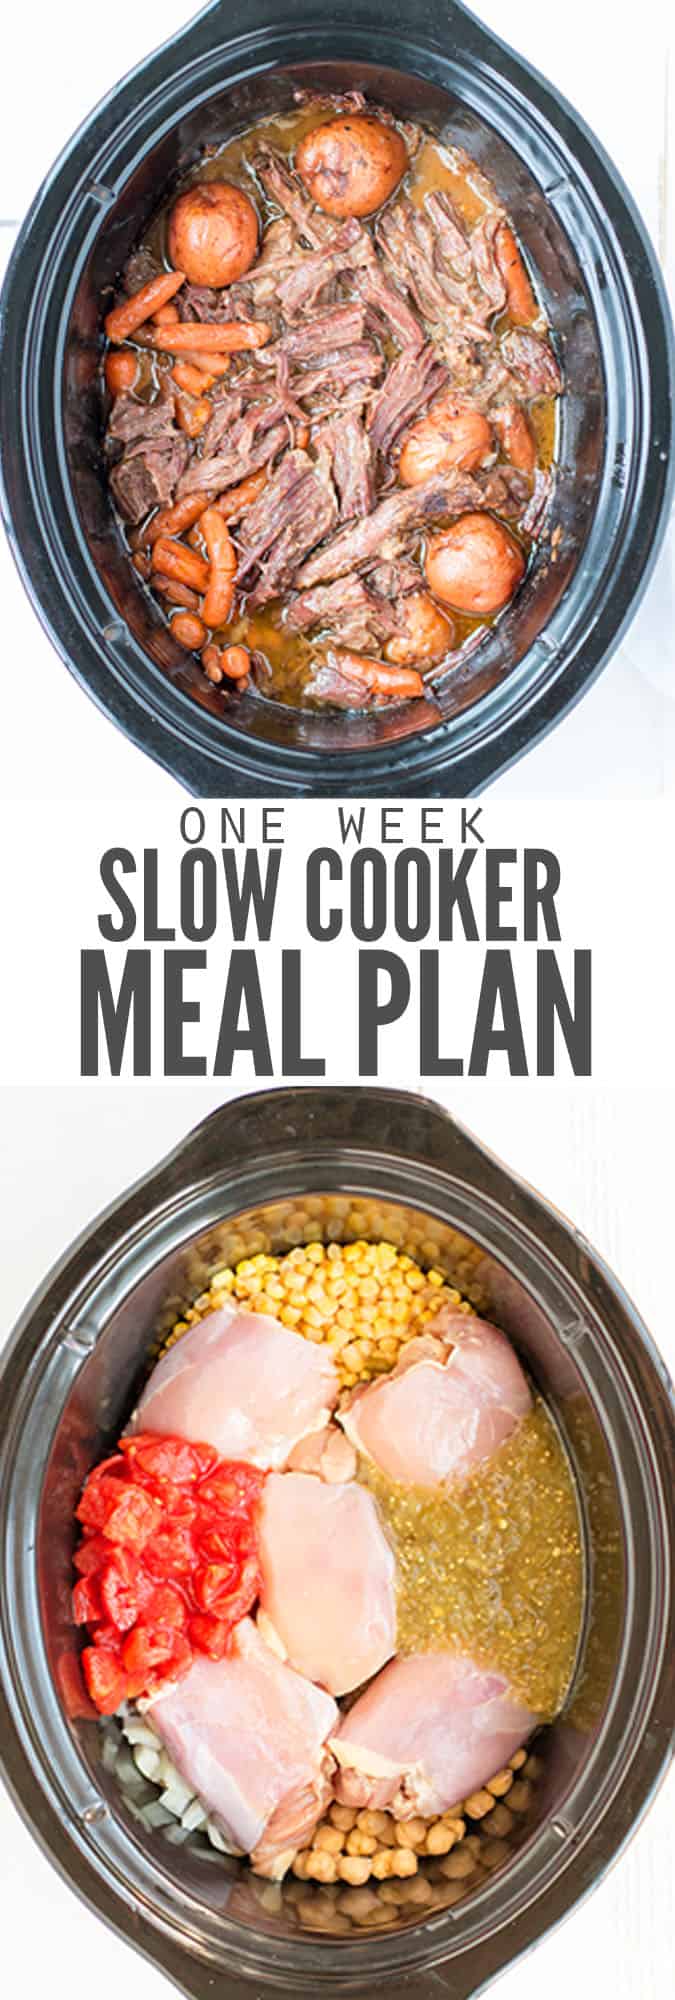 One Week Meal Plan: Slow Cooker Recipes (Super Easy & Healthy)